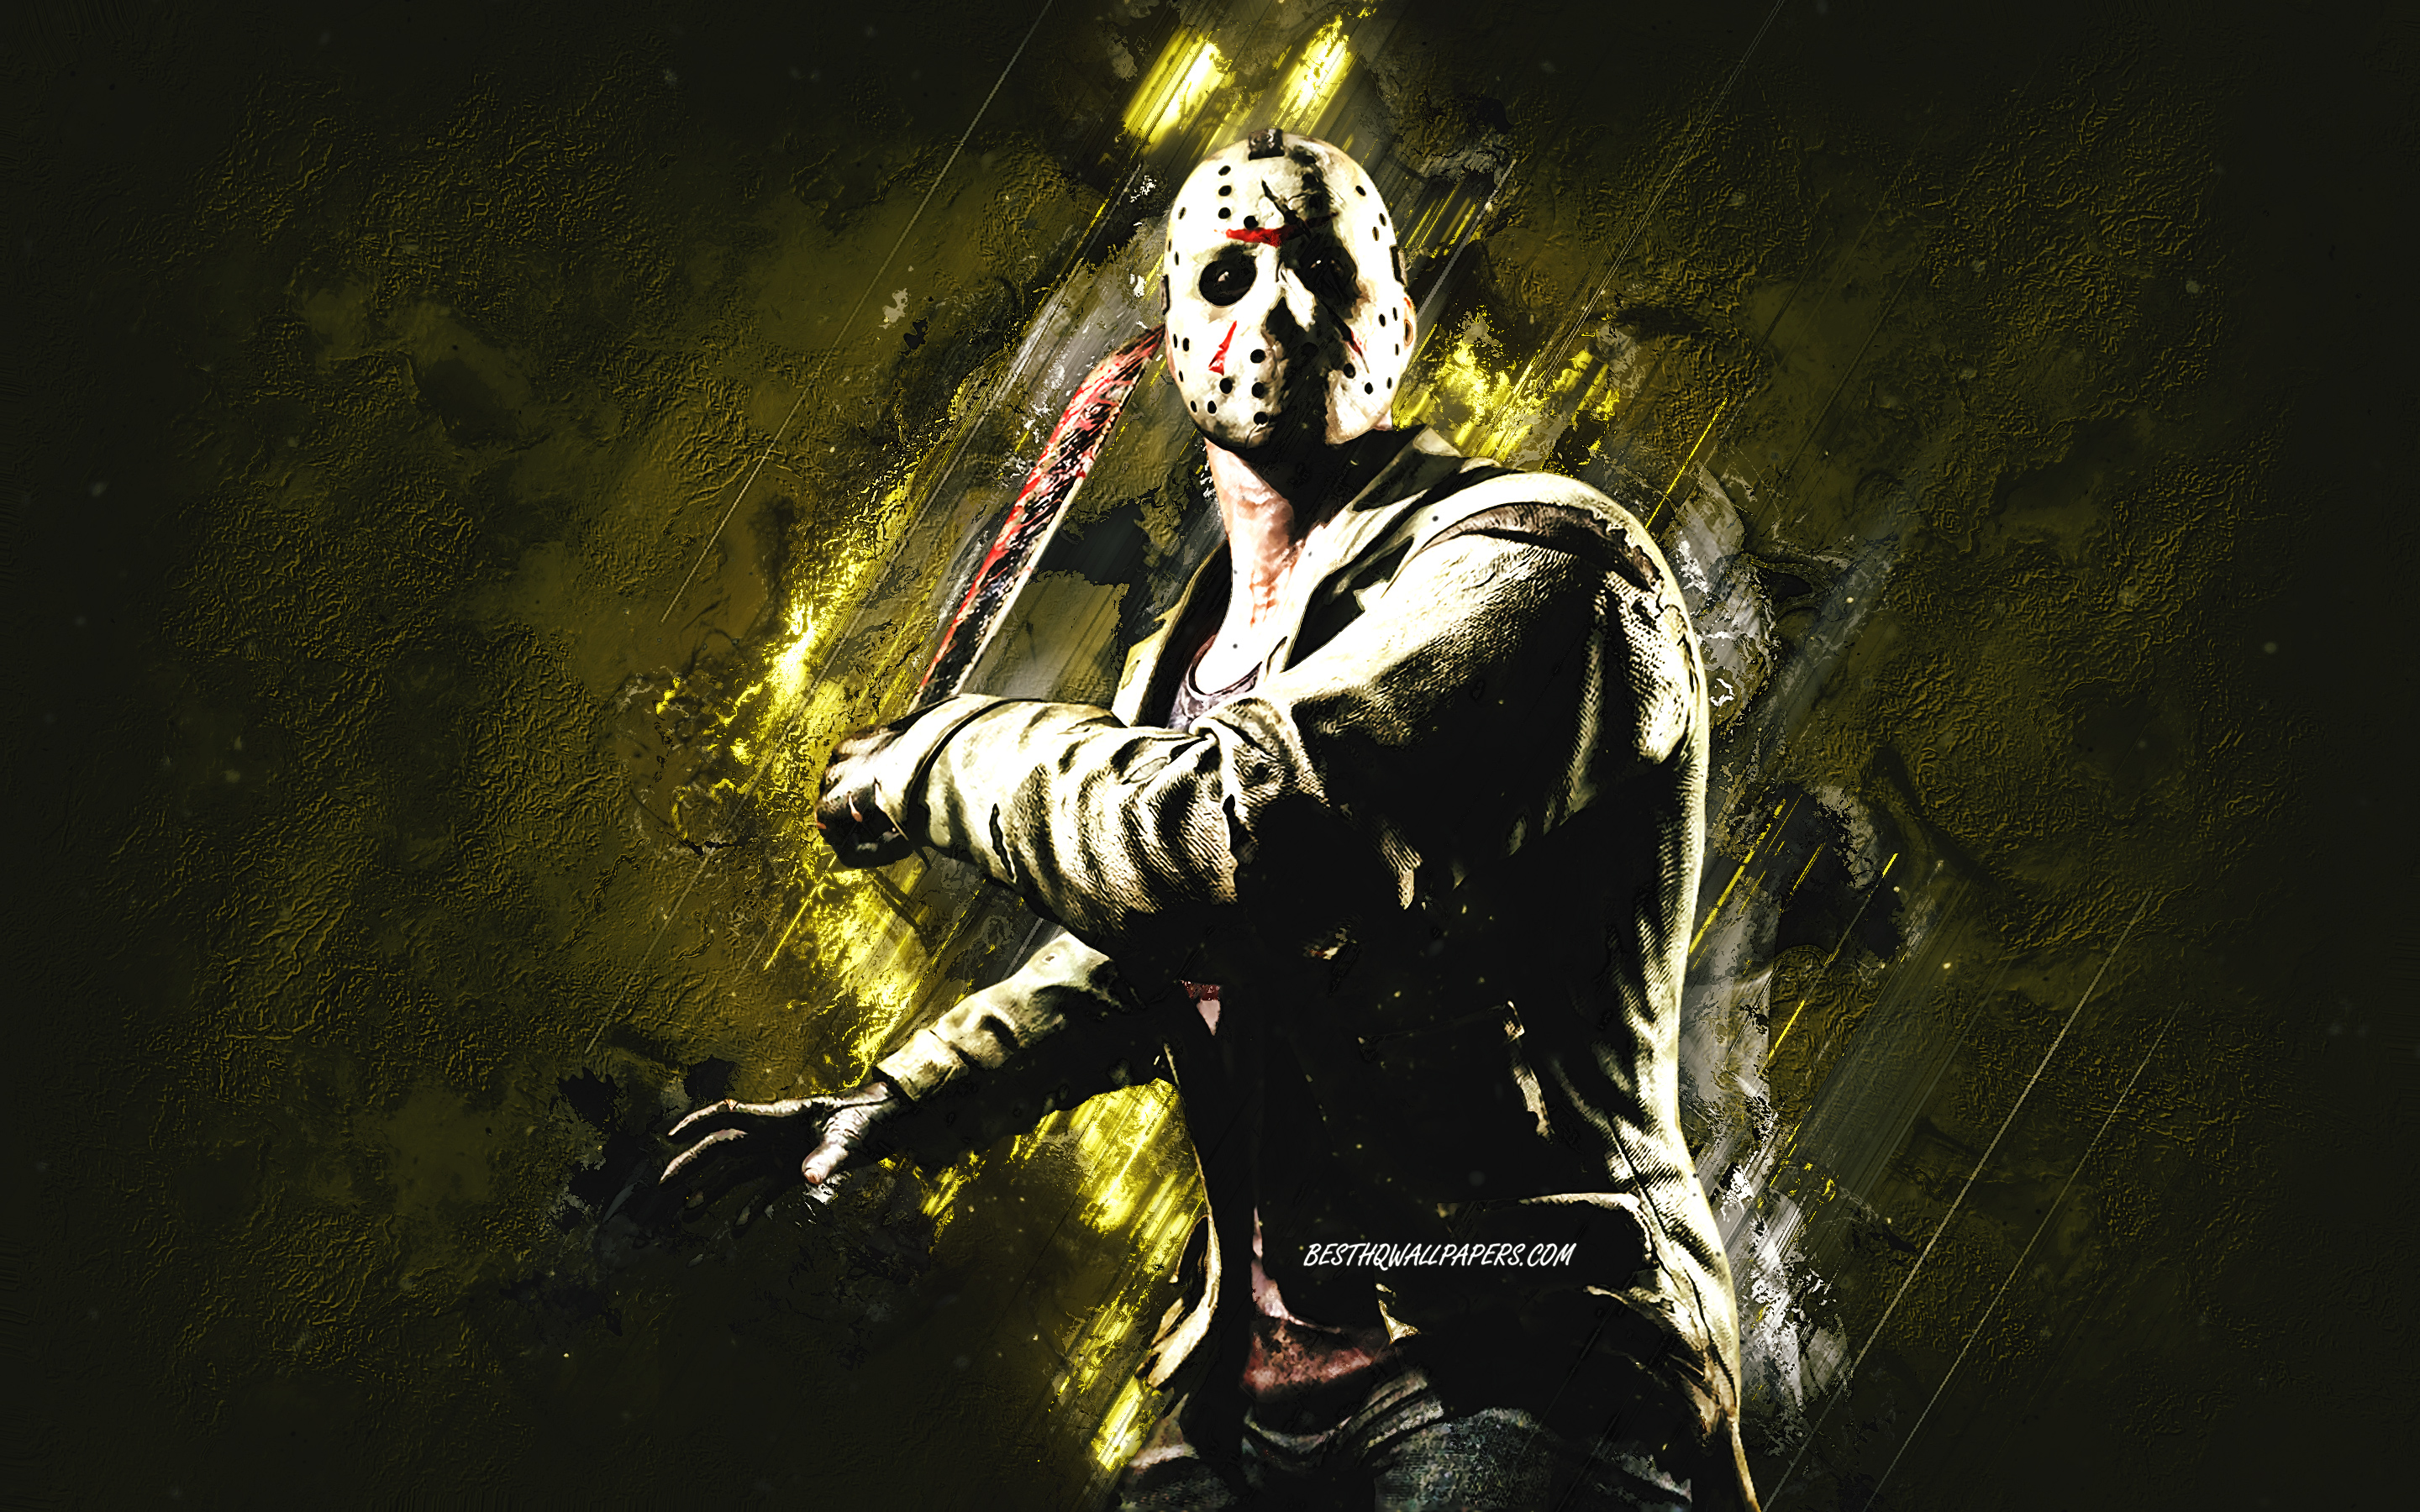 Download wallpaper Jason Voorhees, Mortal Kombat, yellow stone background, Mortal Kombat Jason Voorhees grunge art, Mortal Kombat characters, Jason Voorhees character for desktop with resolution 2880x1800. High Quality HD picture wallpaper